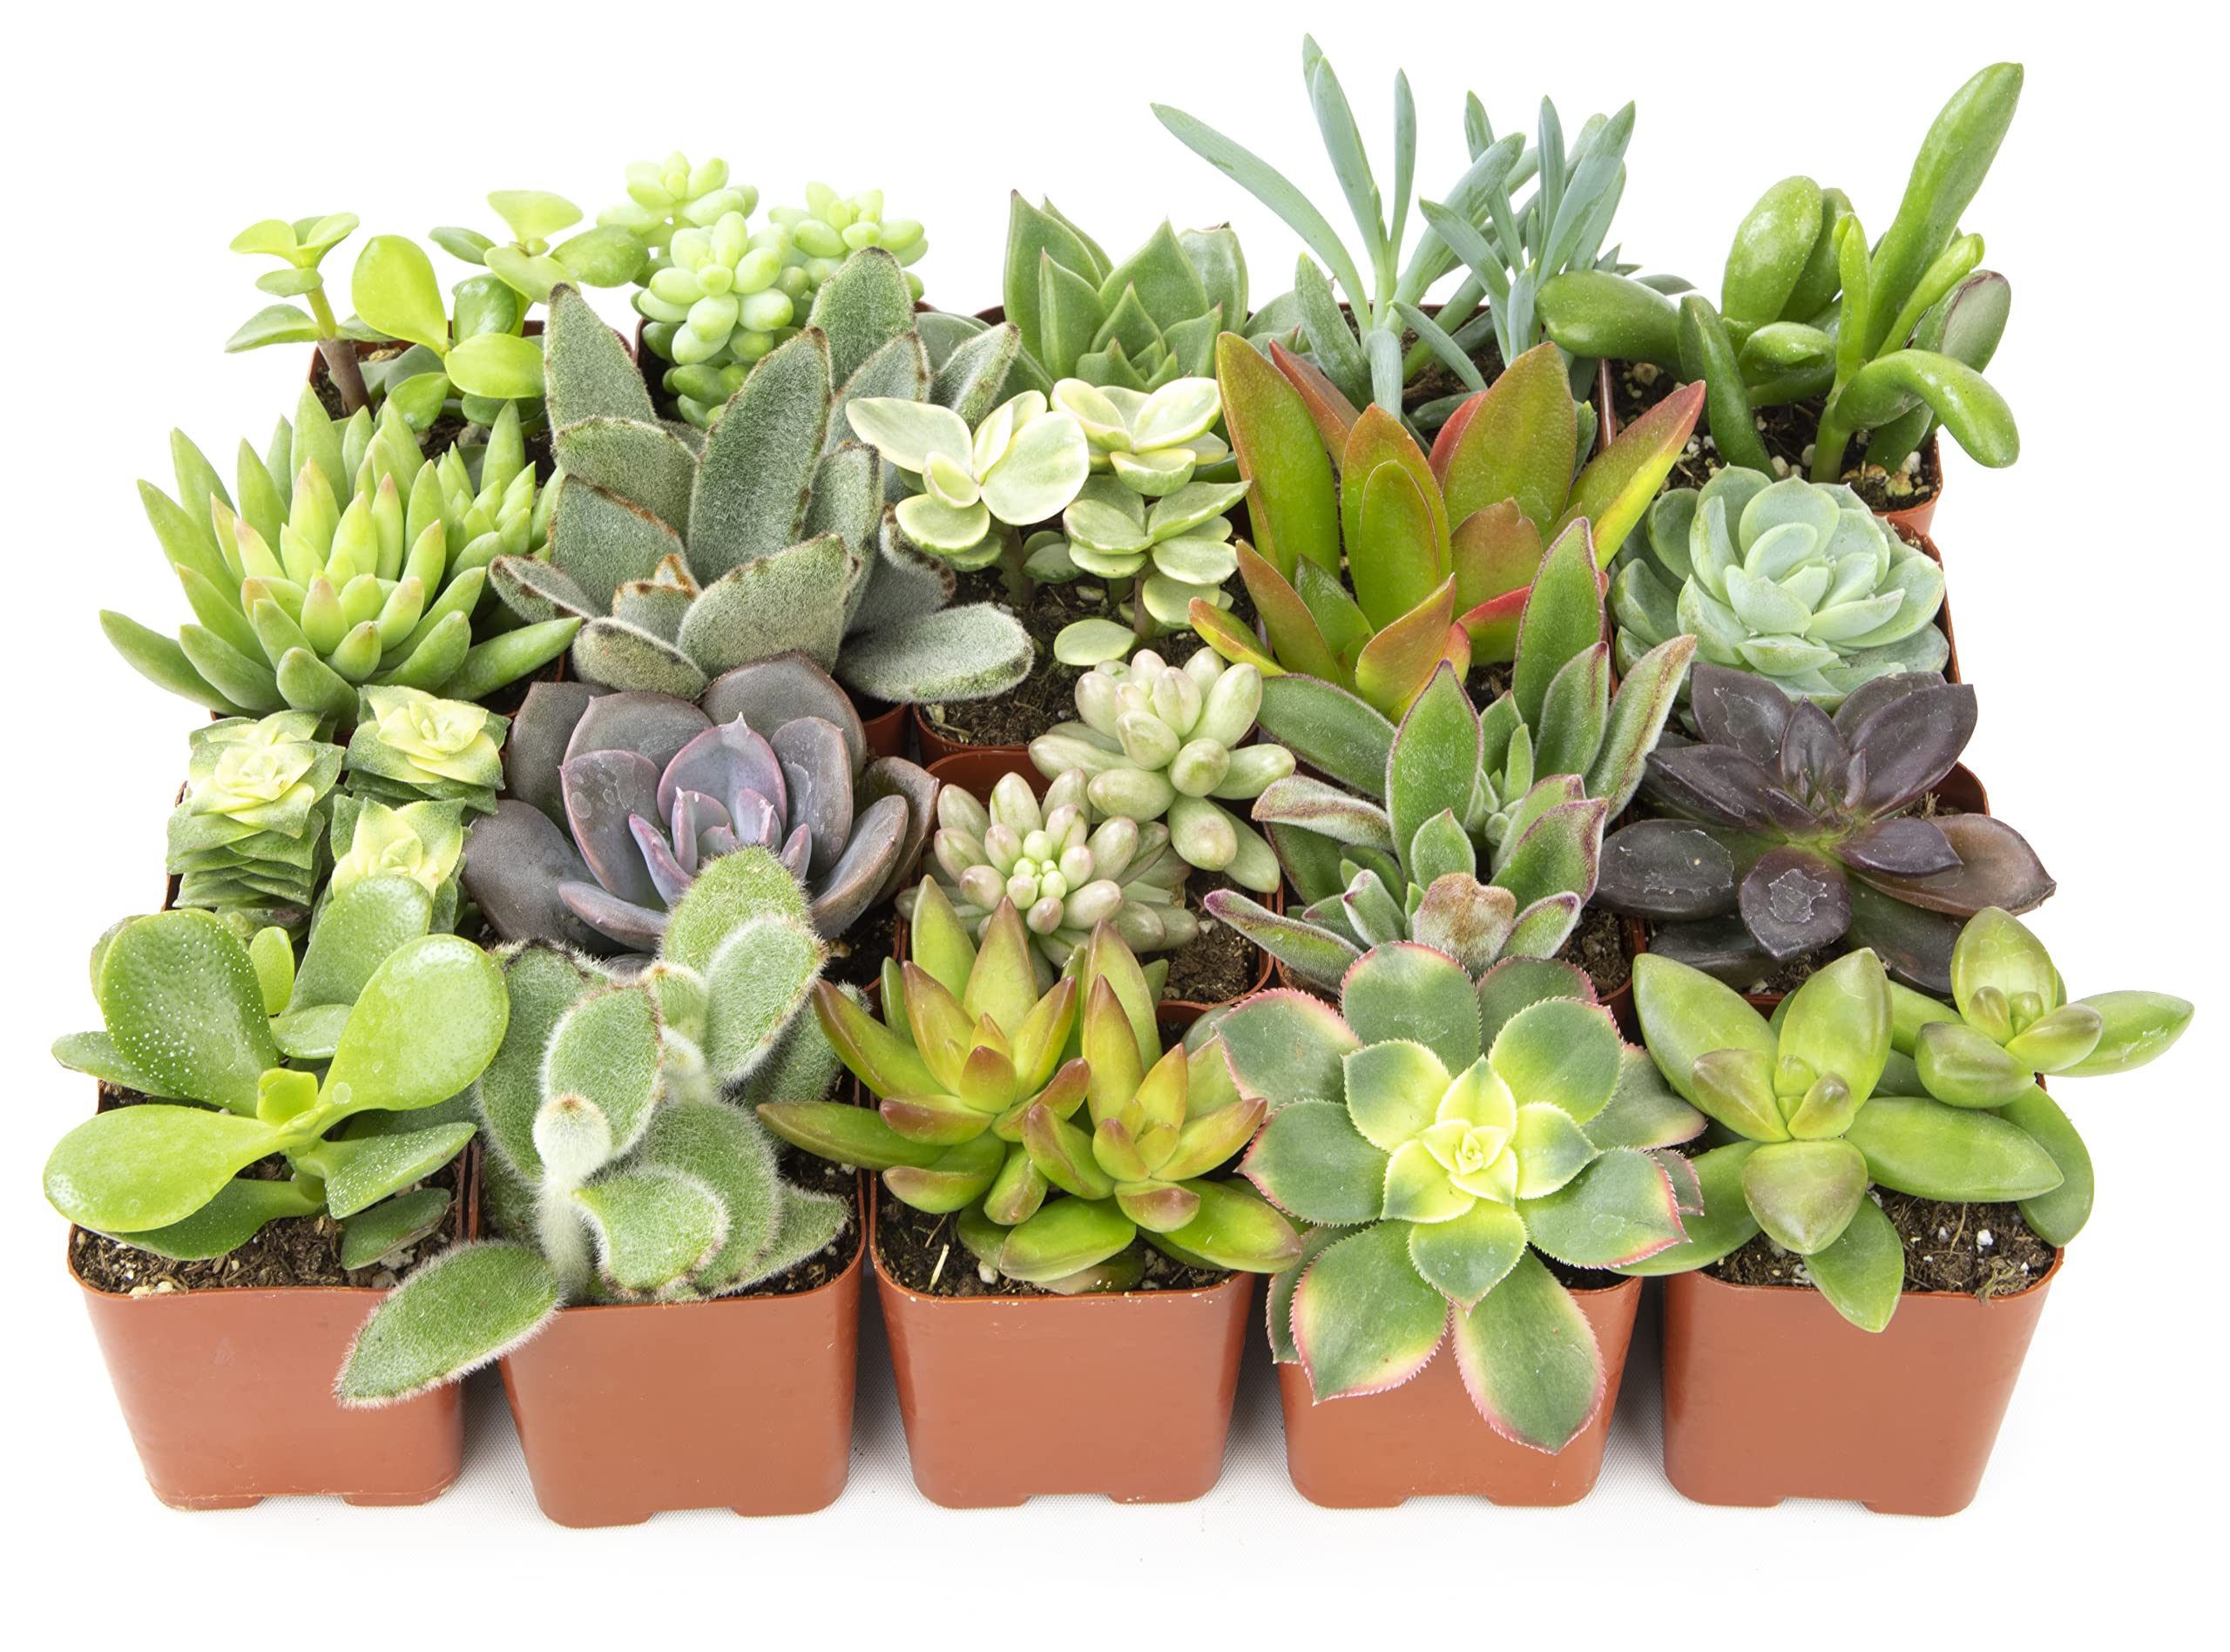 20-Pack Altman Plants Assorted Potted Live Succulent Plants $21.52 + Free Shipping w/ Prime